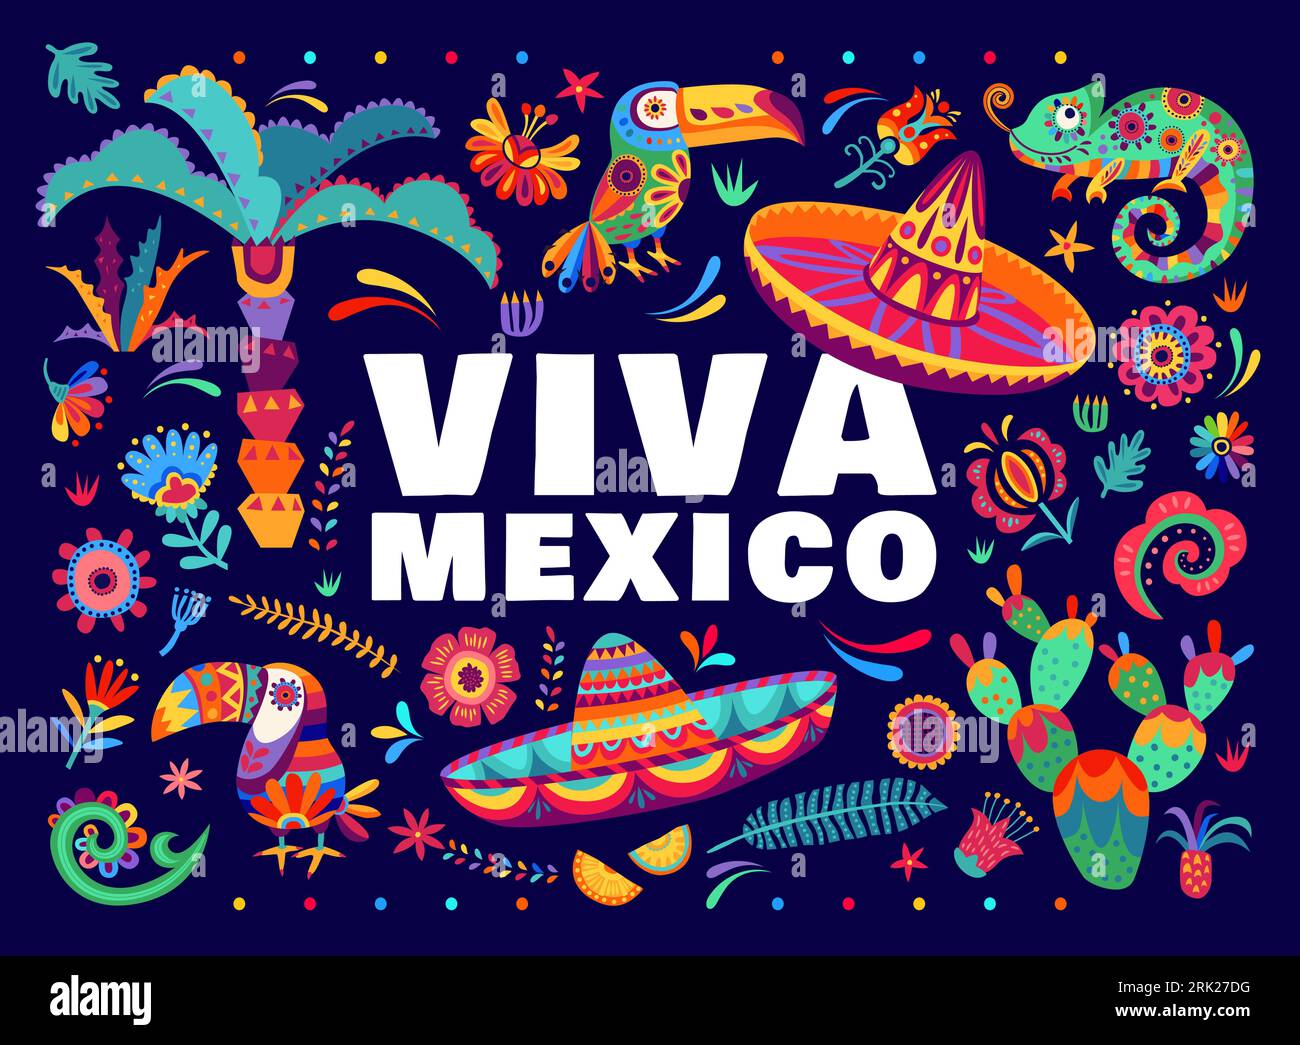 Viva mexico banner with tropical flowers, cactuses and chameleons, mexican sombrero hat and toucans. Vector background, capturing vibrant essence of m Stock Vector